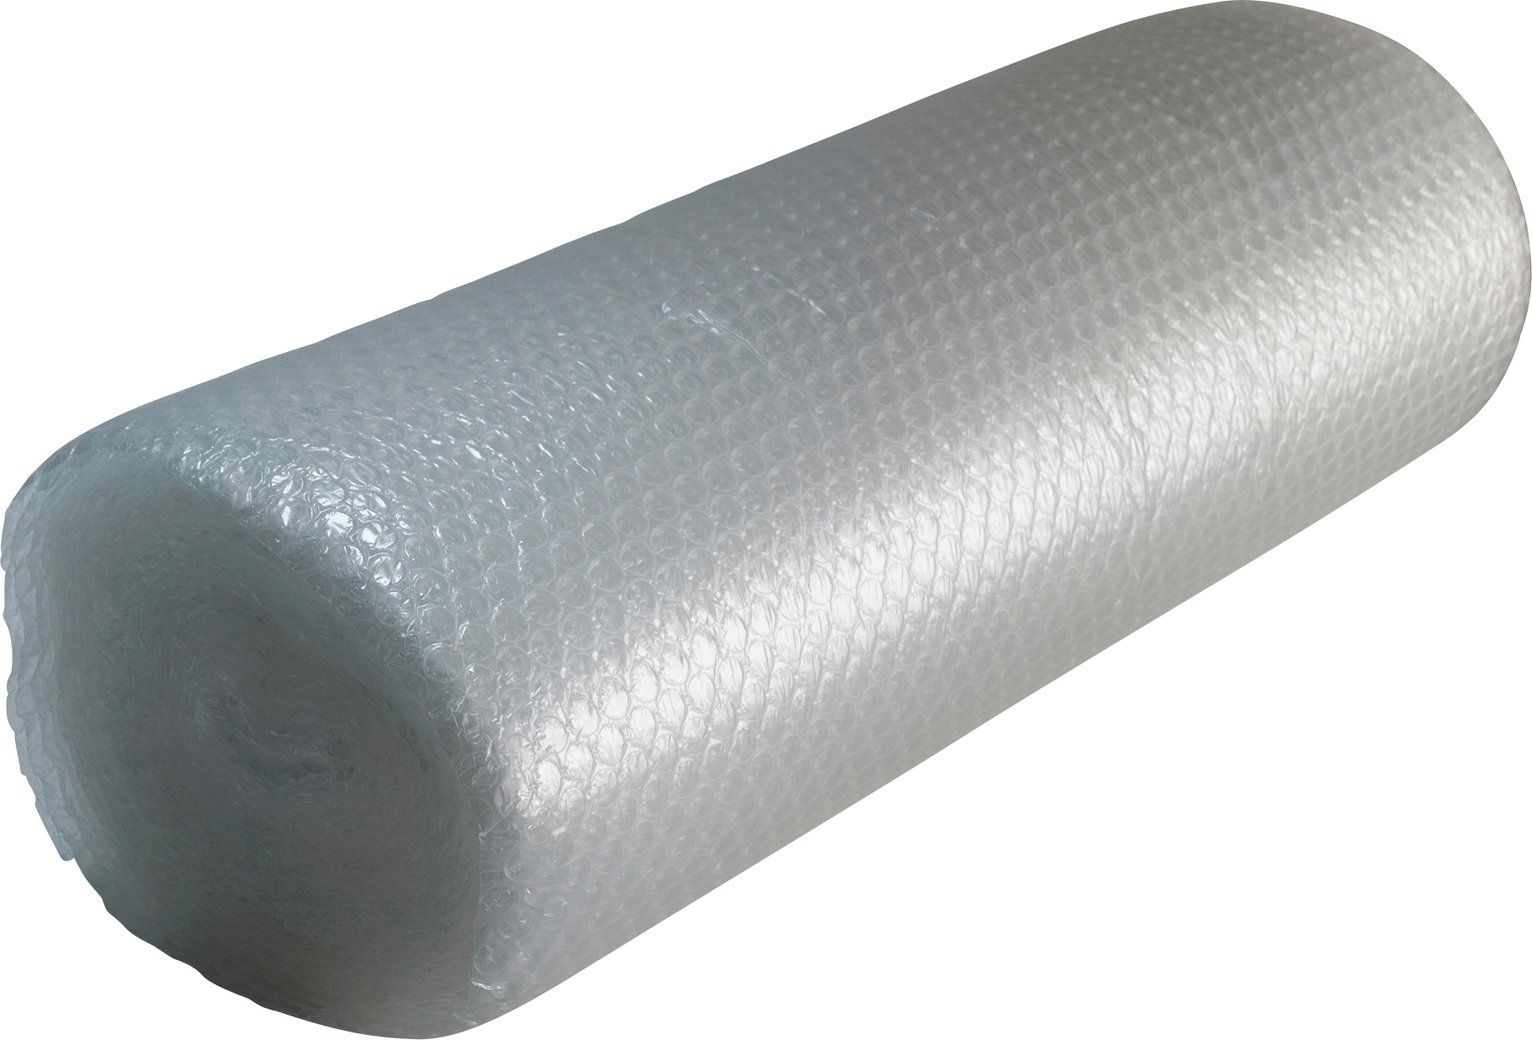 where can i buy bubble wrap uk